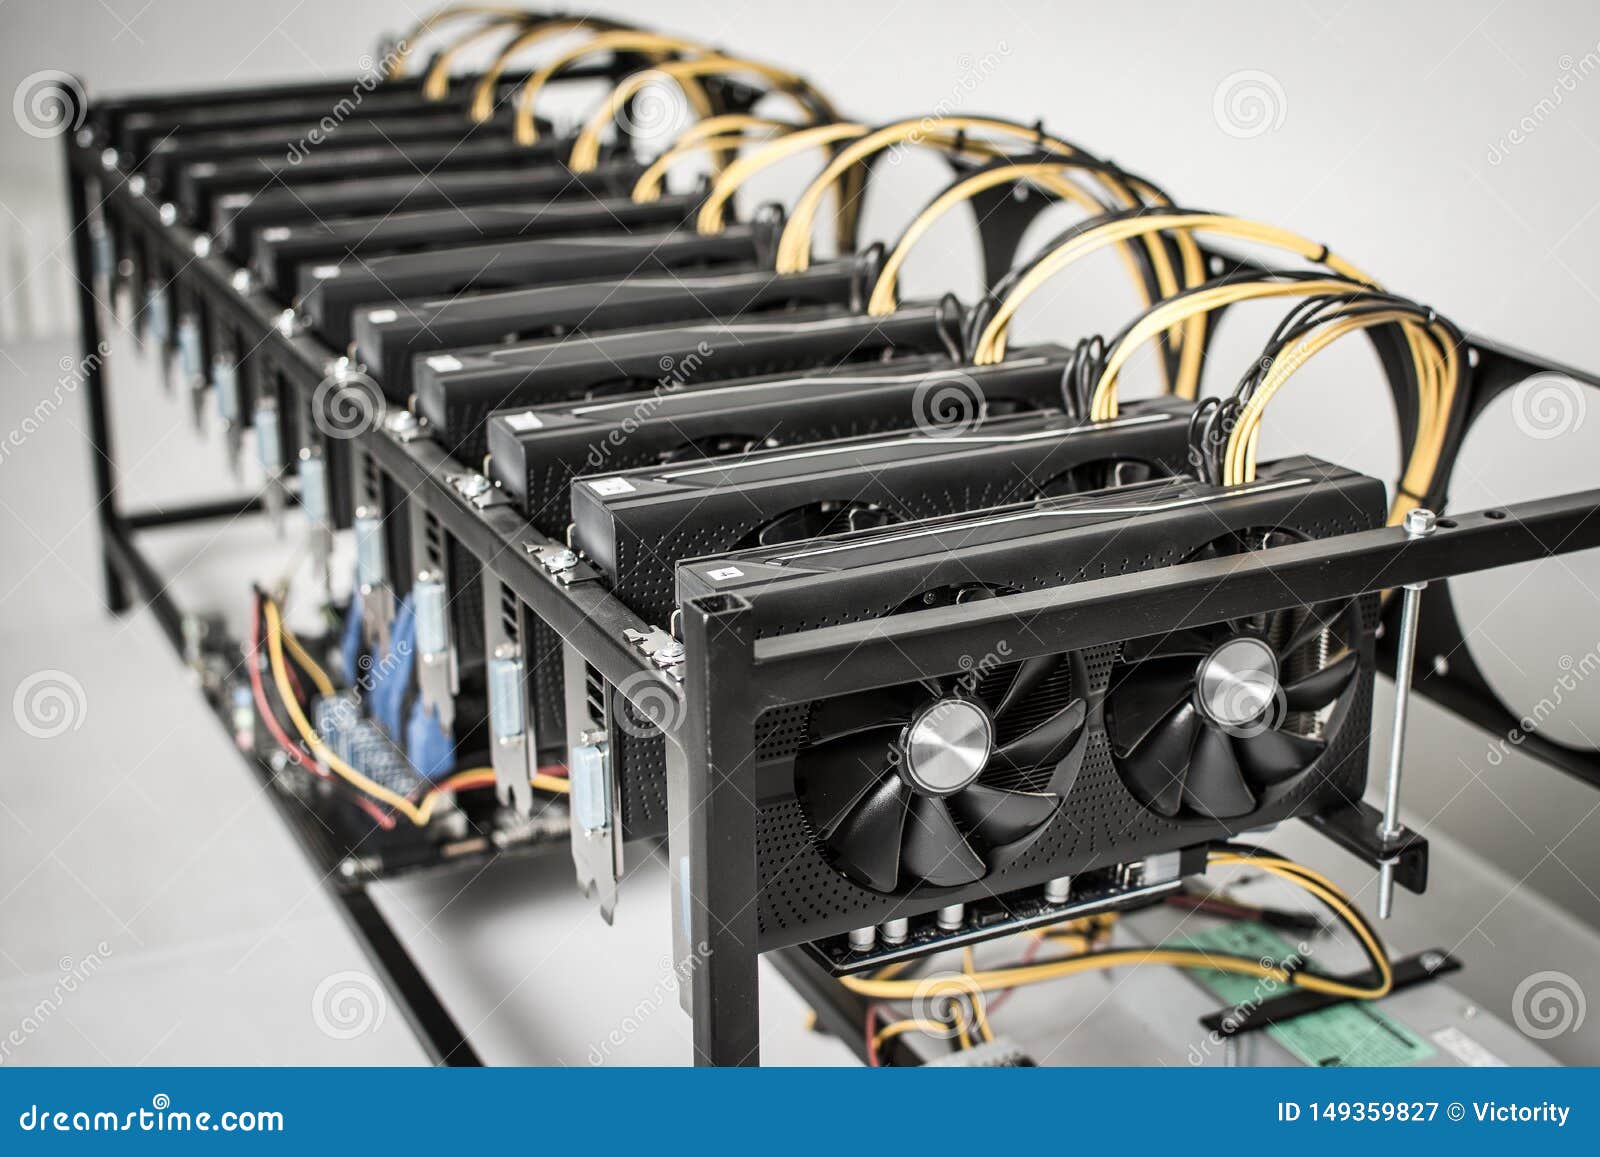 Cryptocurrency mining graphics cards